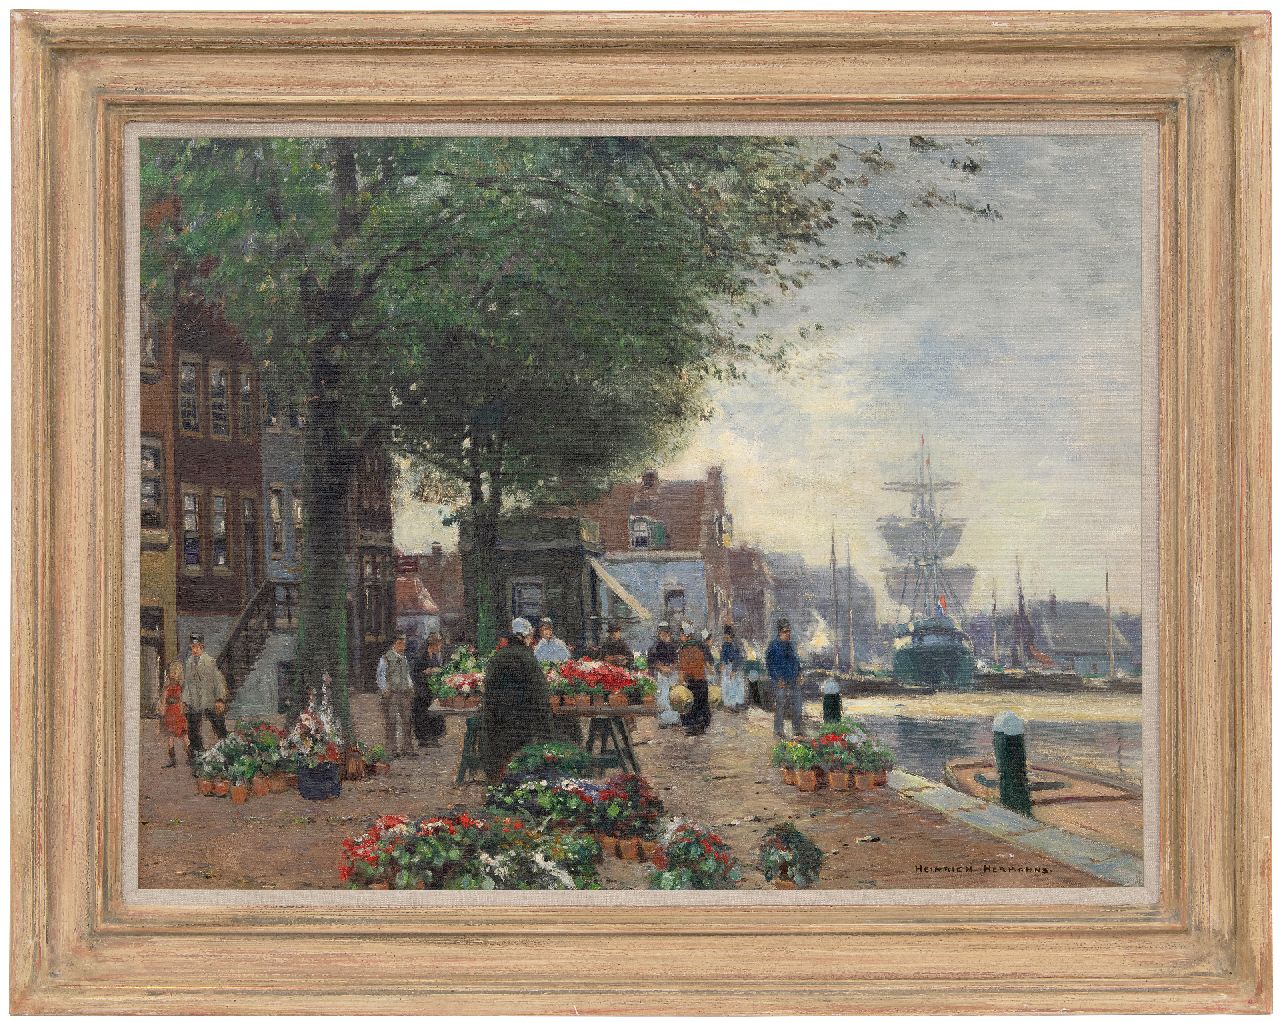 Hermanns H.  | Heinrich Hermanns | Paintings offered for sale | Flower market on a harbor quay, oil on canvas 60.5 x 80.7 cm, signed l.r.